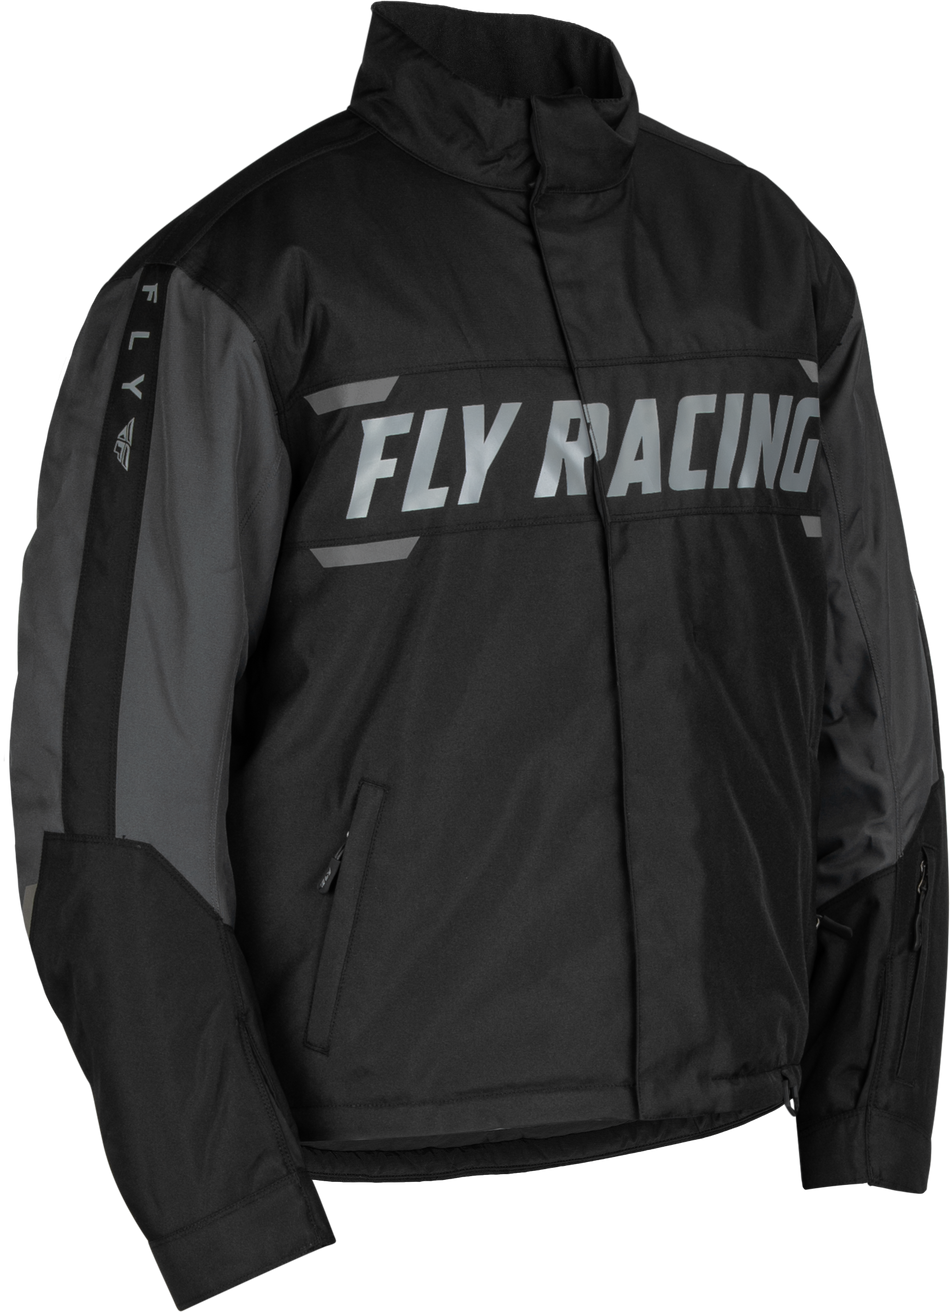 FLY RACING Outpost Jacket Black/Grey 5x 470-55005X